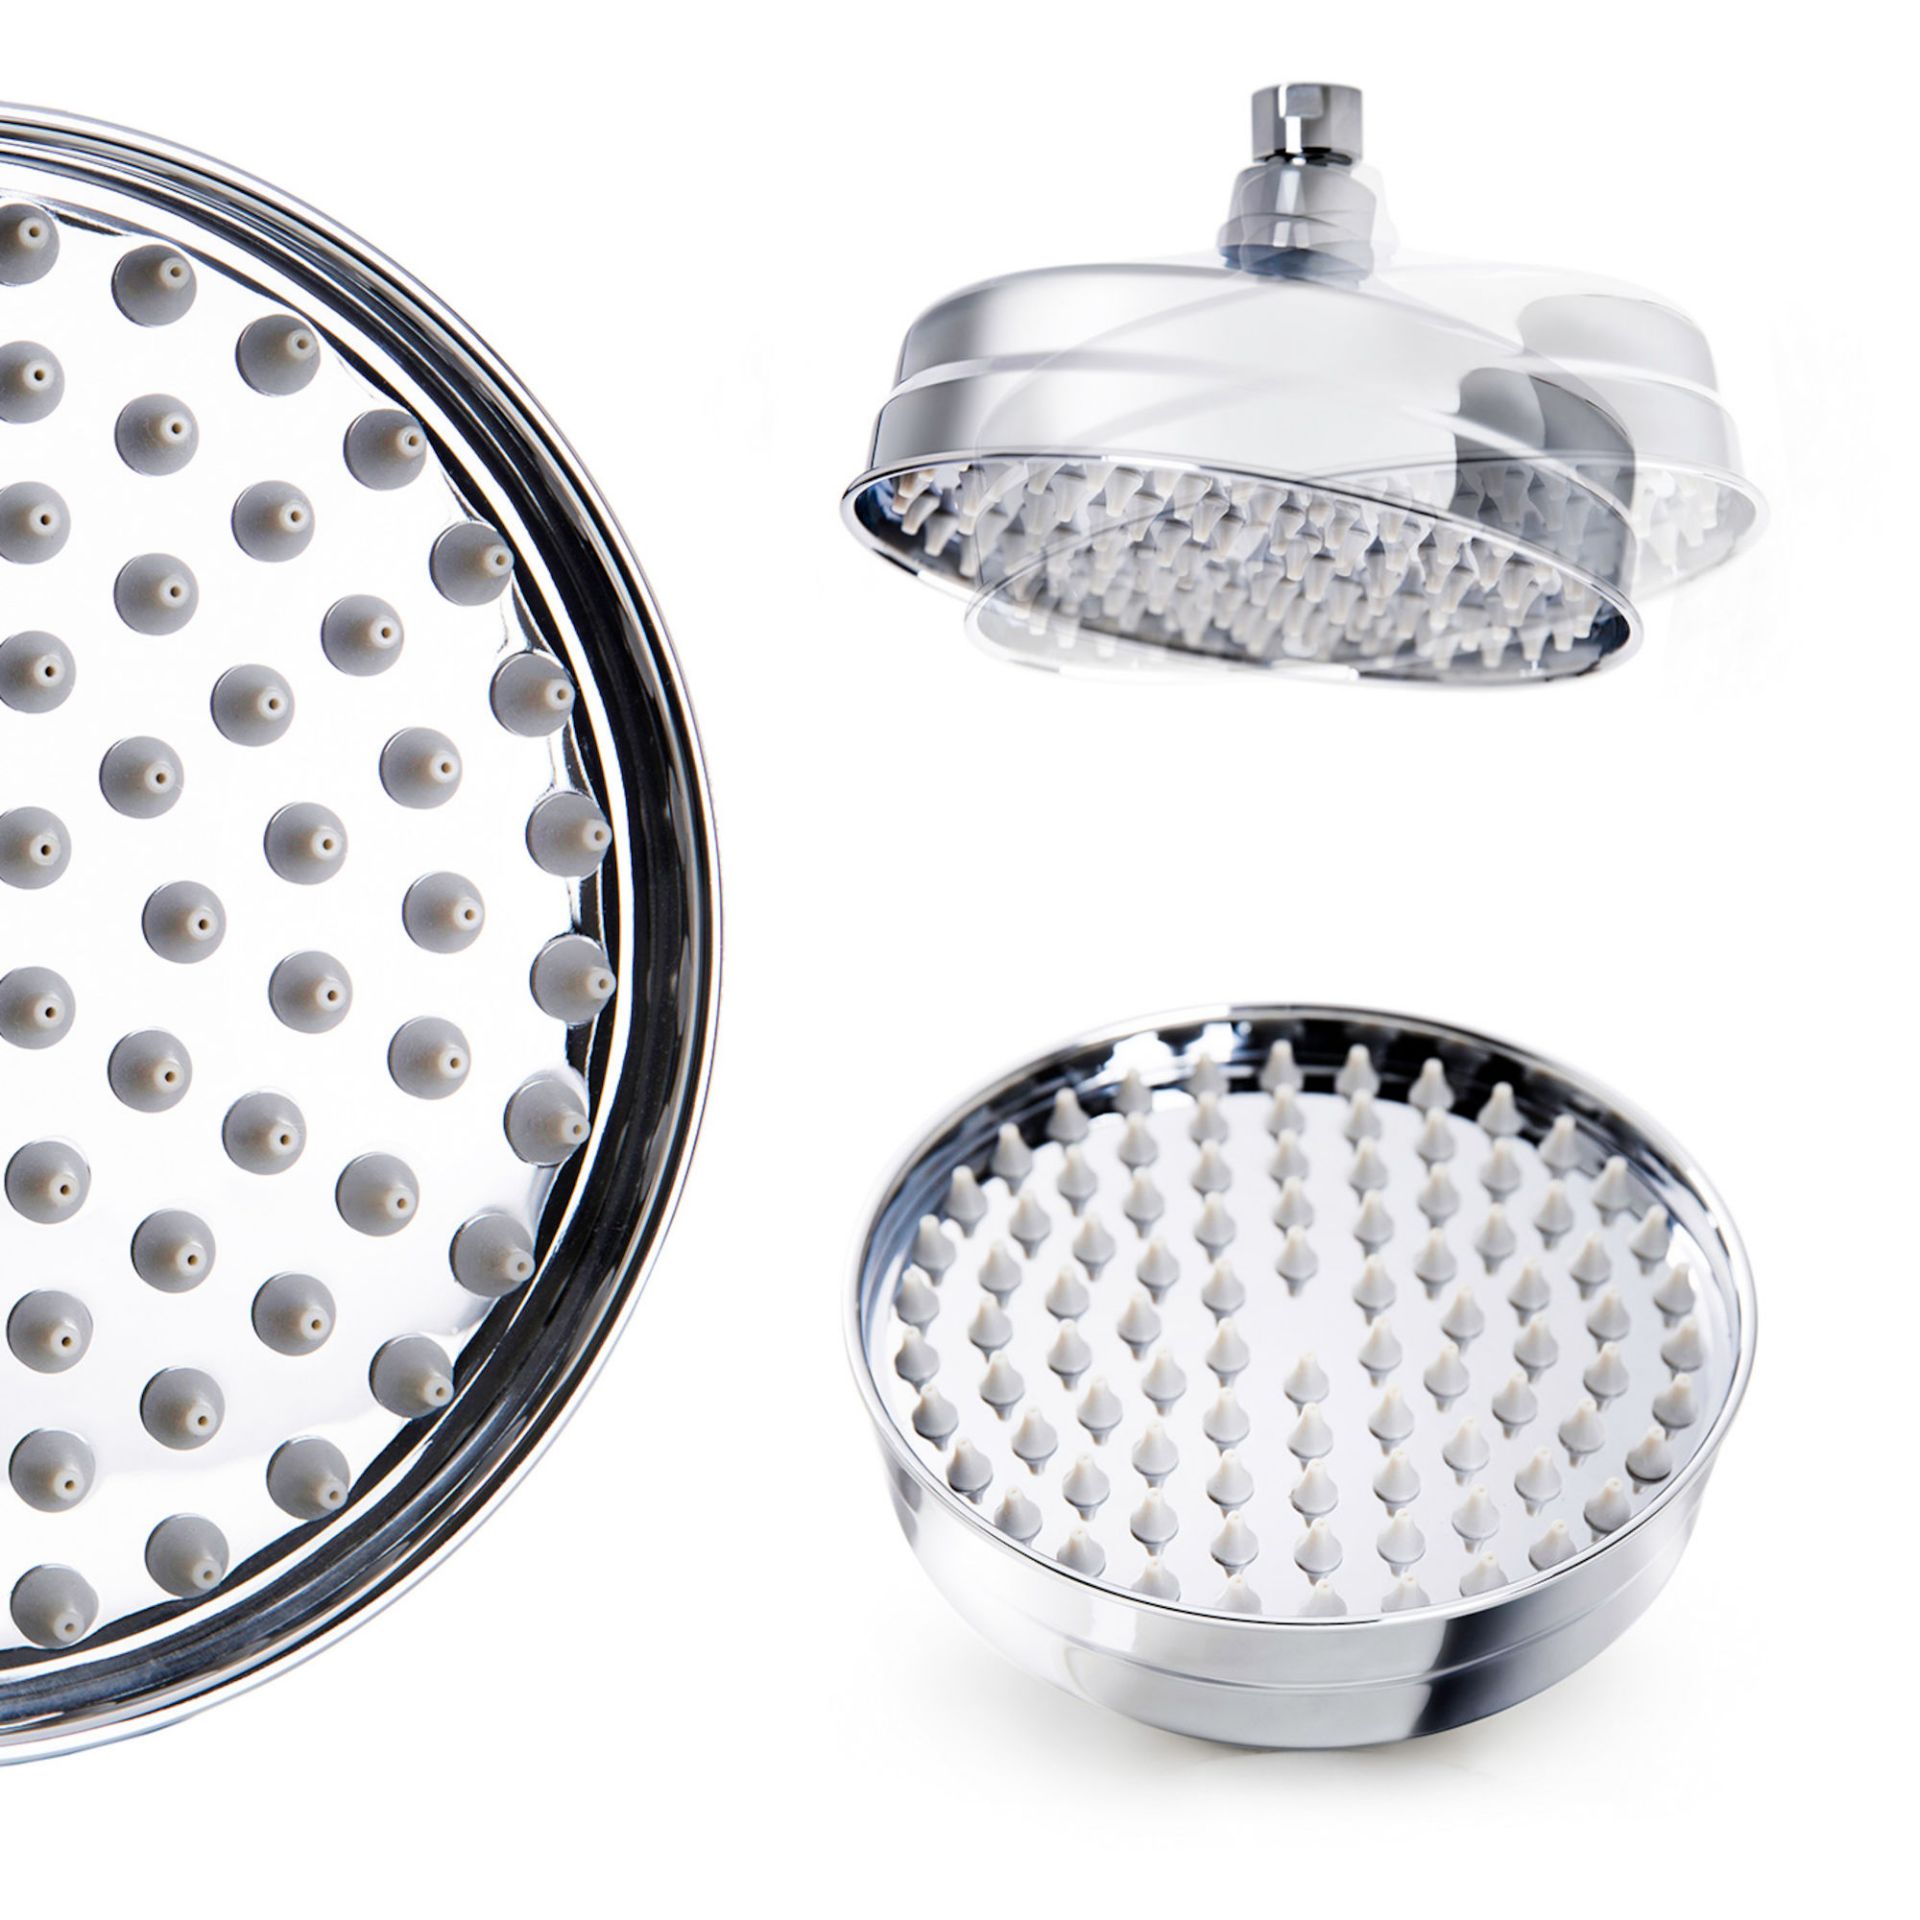 (R1028) Stainless Steel 150mm Traditional Round Shower Head Finished in high quality polished chrome - Image 2 of 2